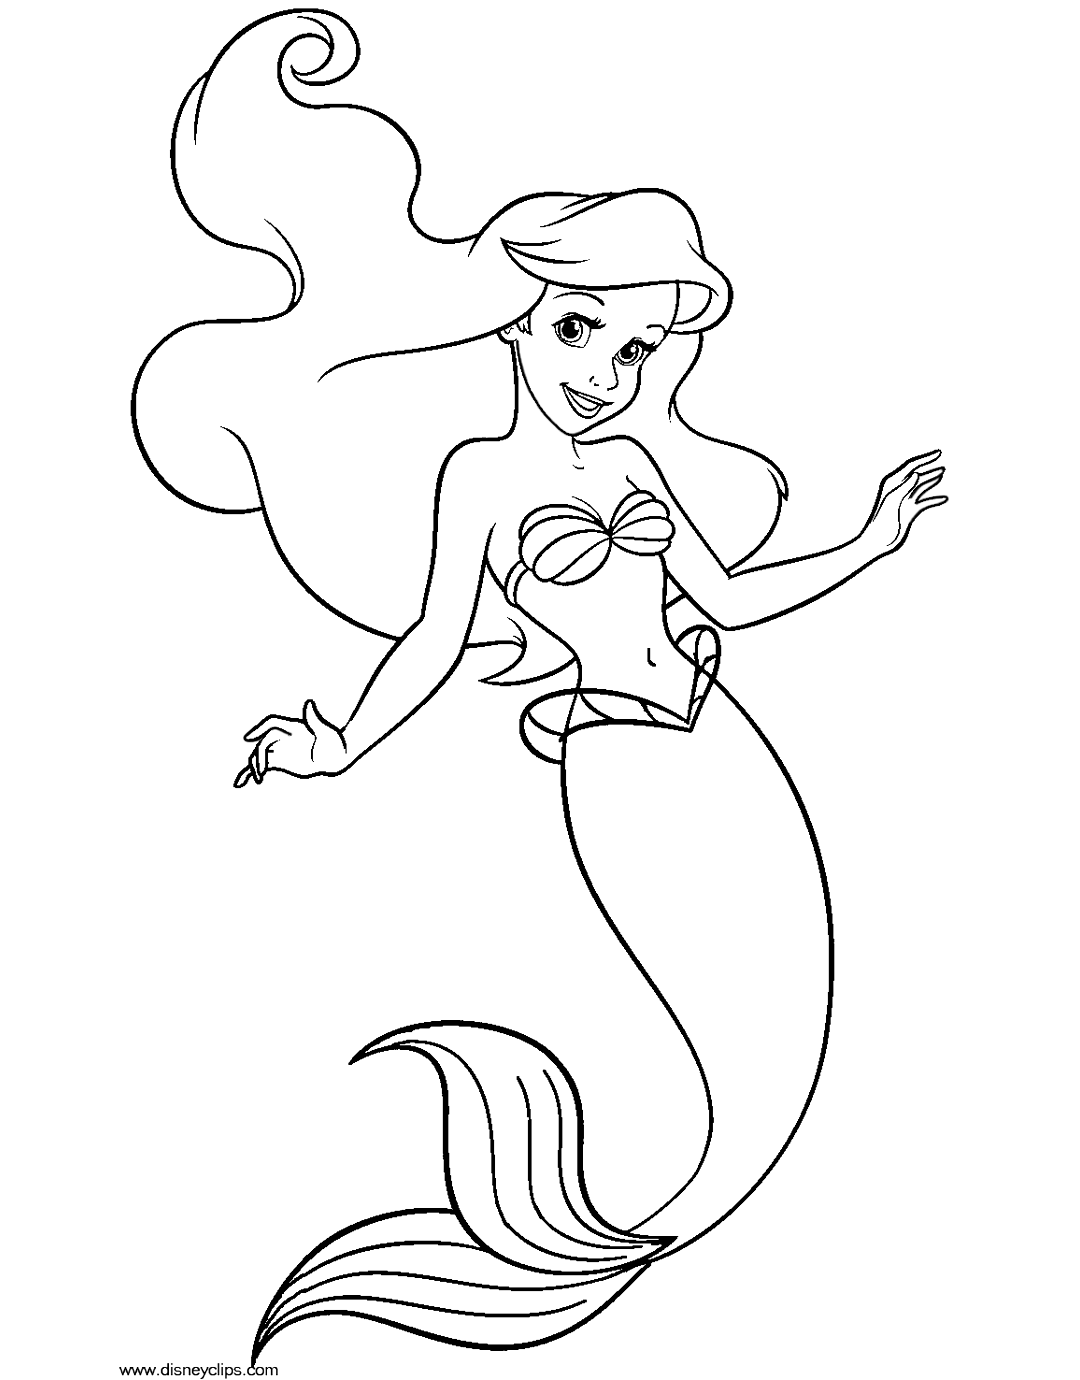 The Little Mermaid Printable Coloring Pages 3 | Disney Coloring Book